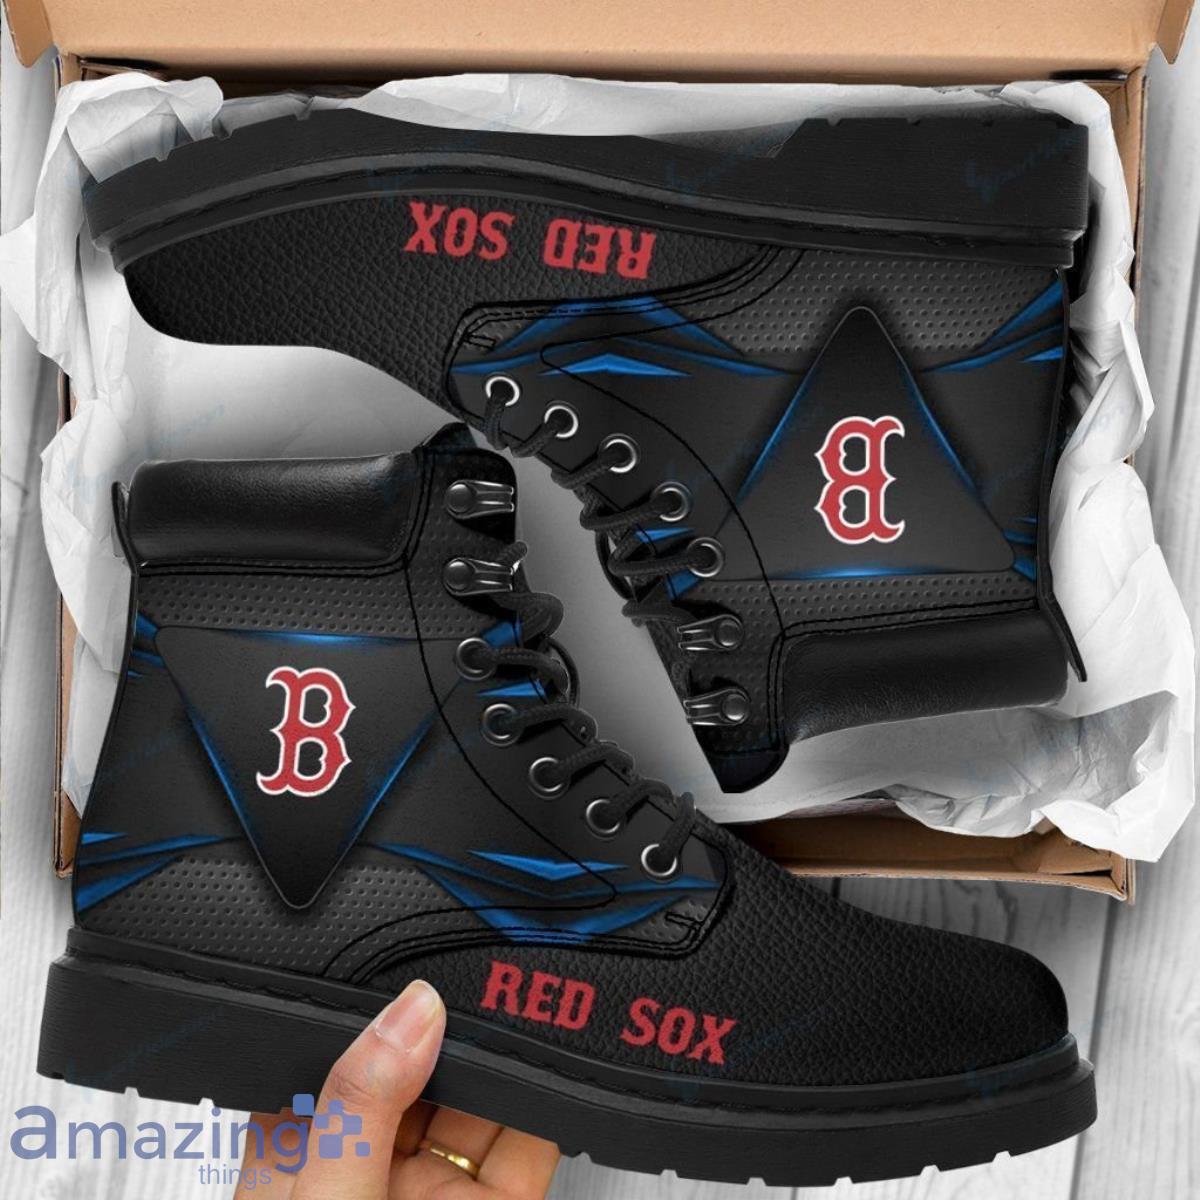 Boston Red Sox Football Team Leather Boots For Men Women Great Gift For Fans Product Photo 1